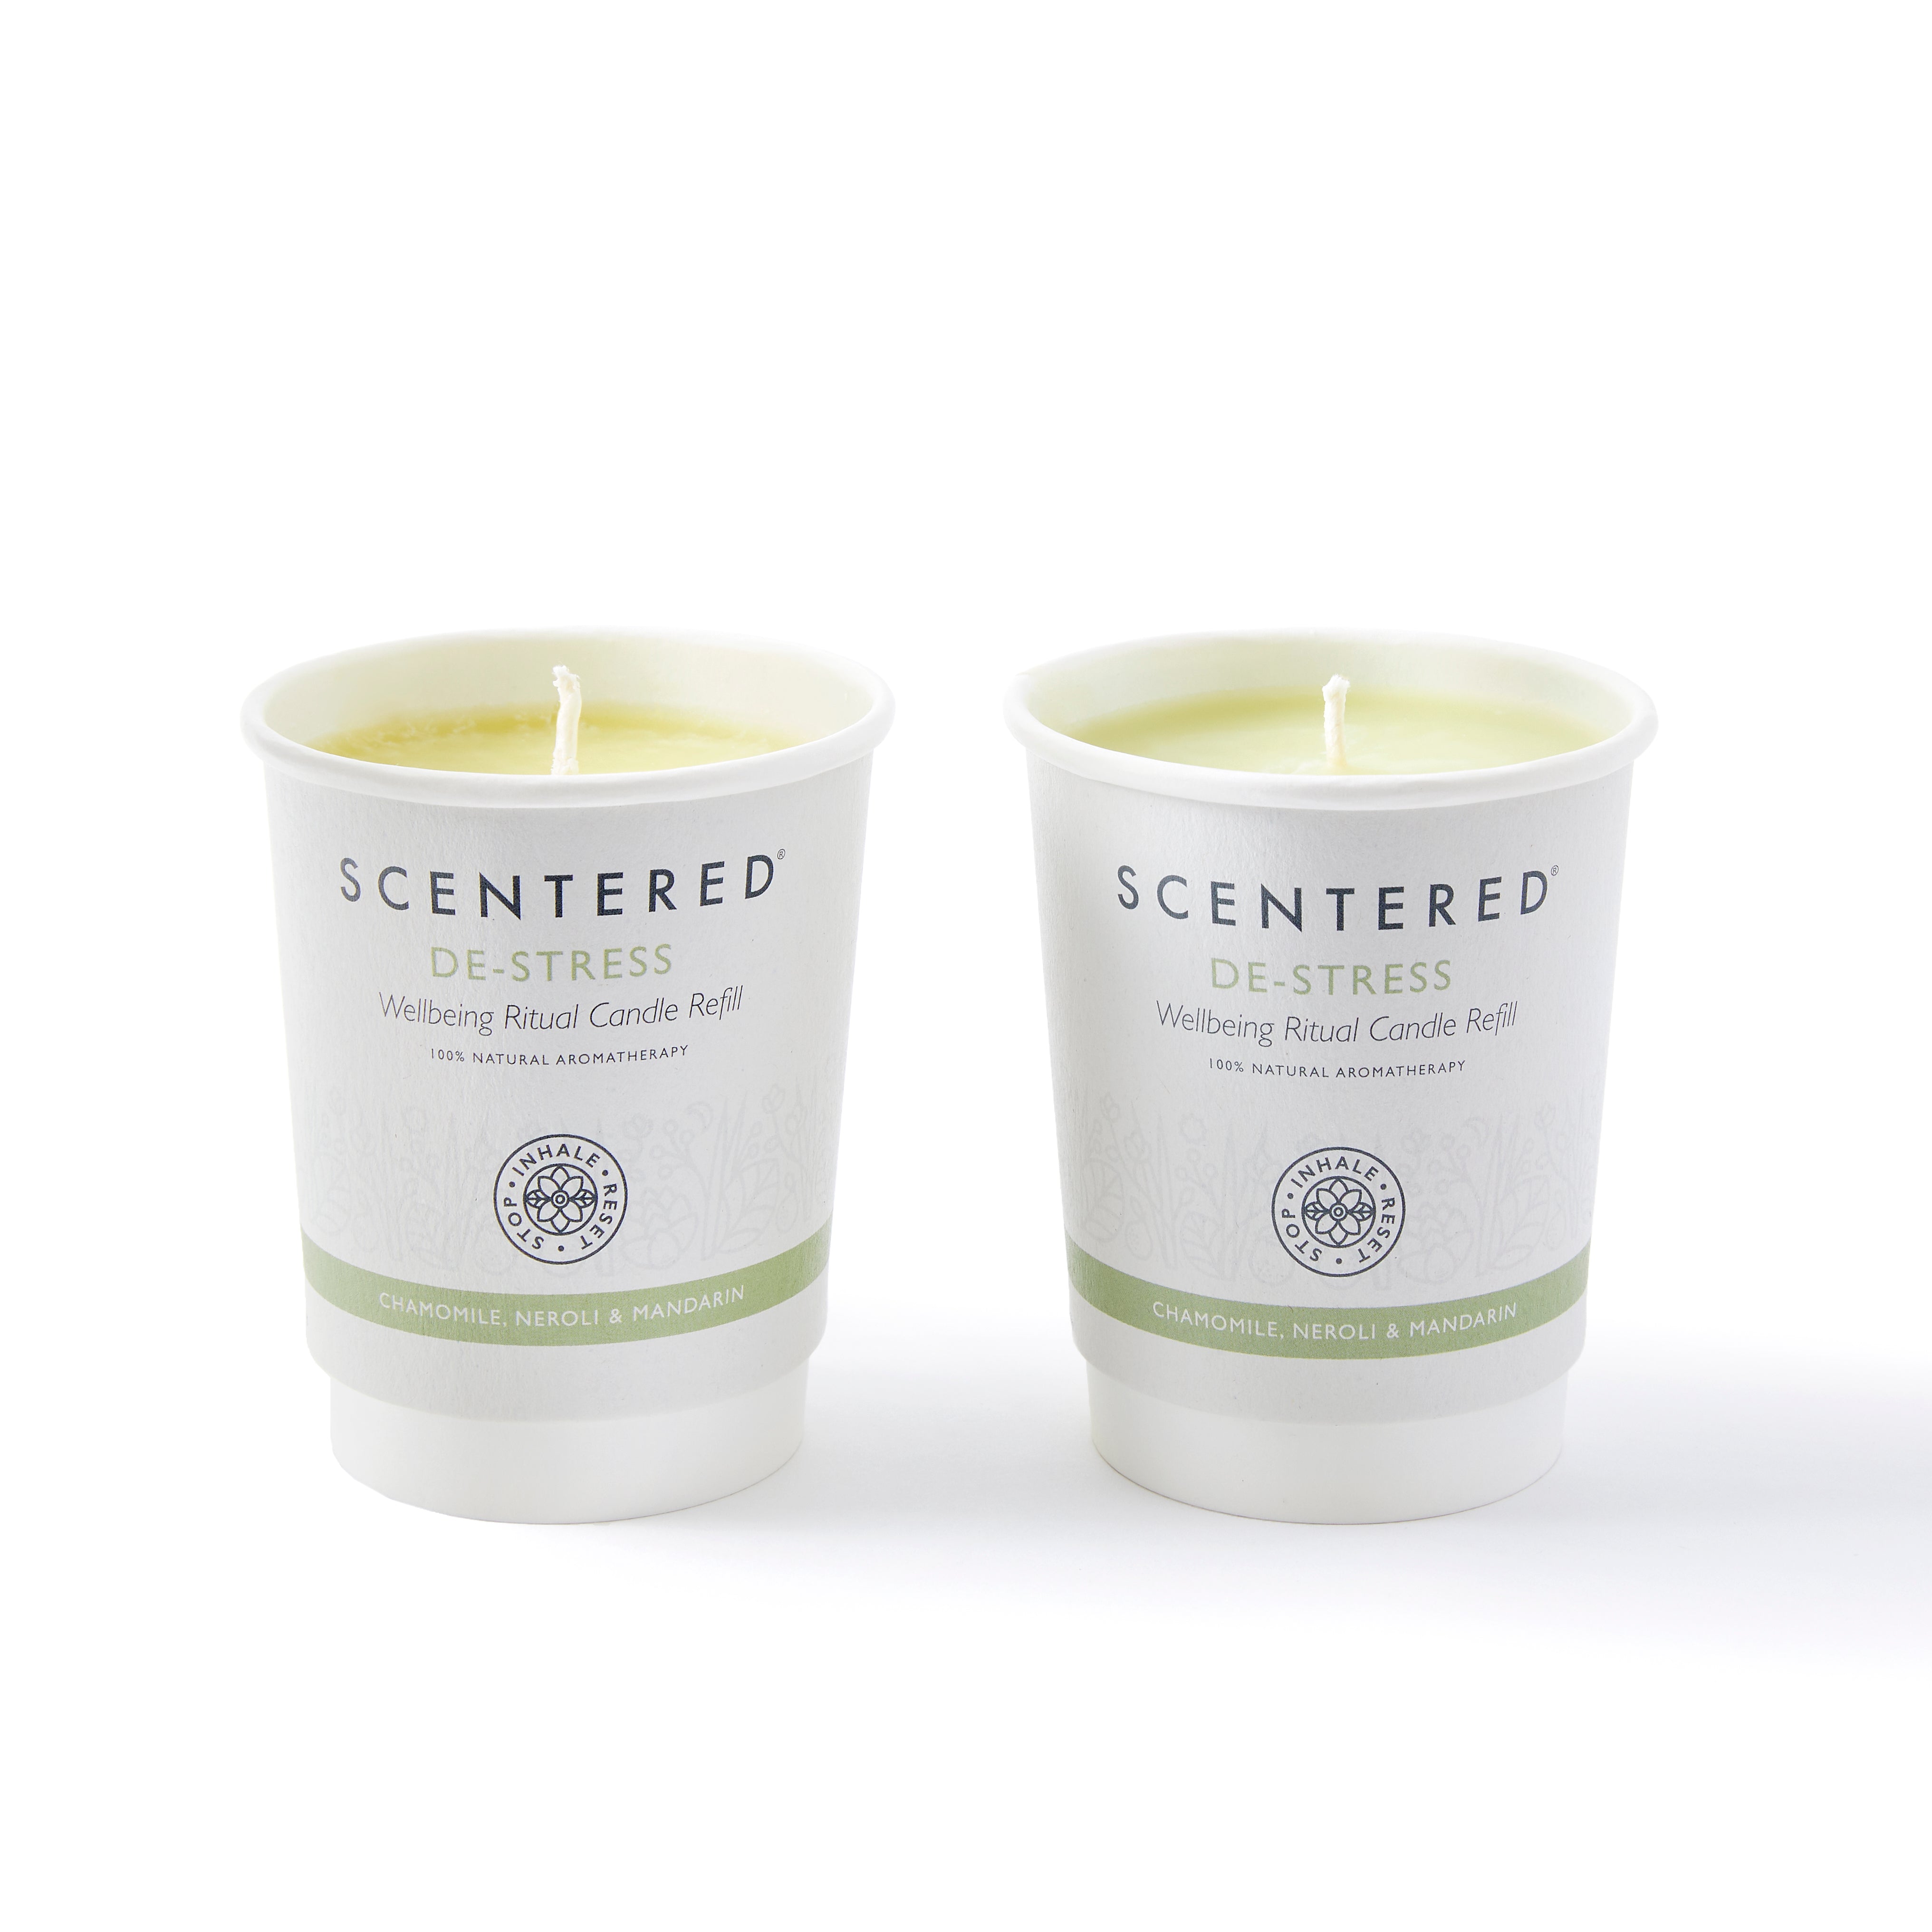 Scentered de Stress Home Aromatherapy Candle Refill Duo